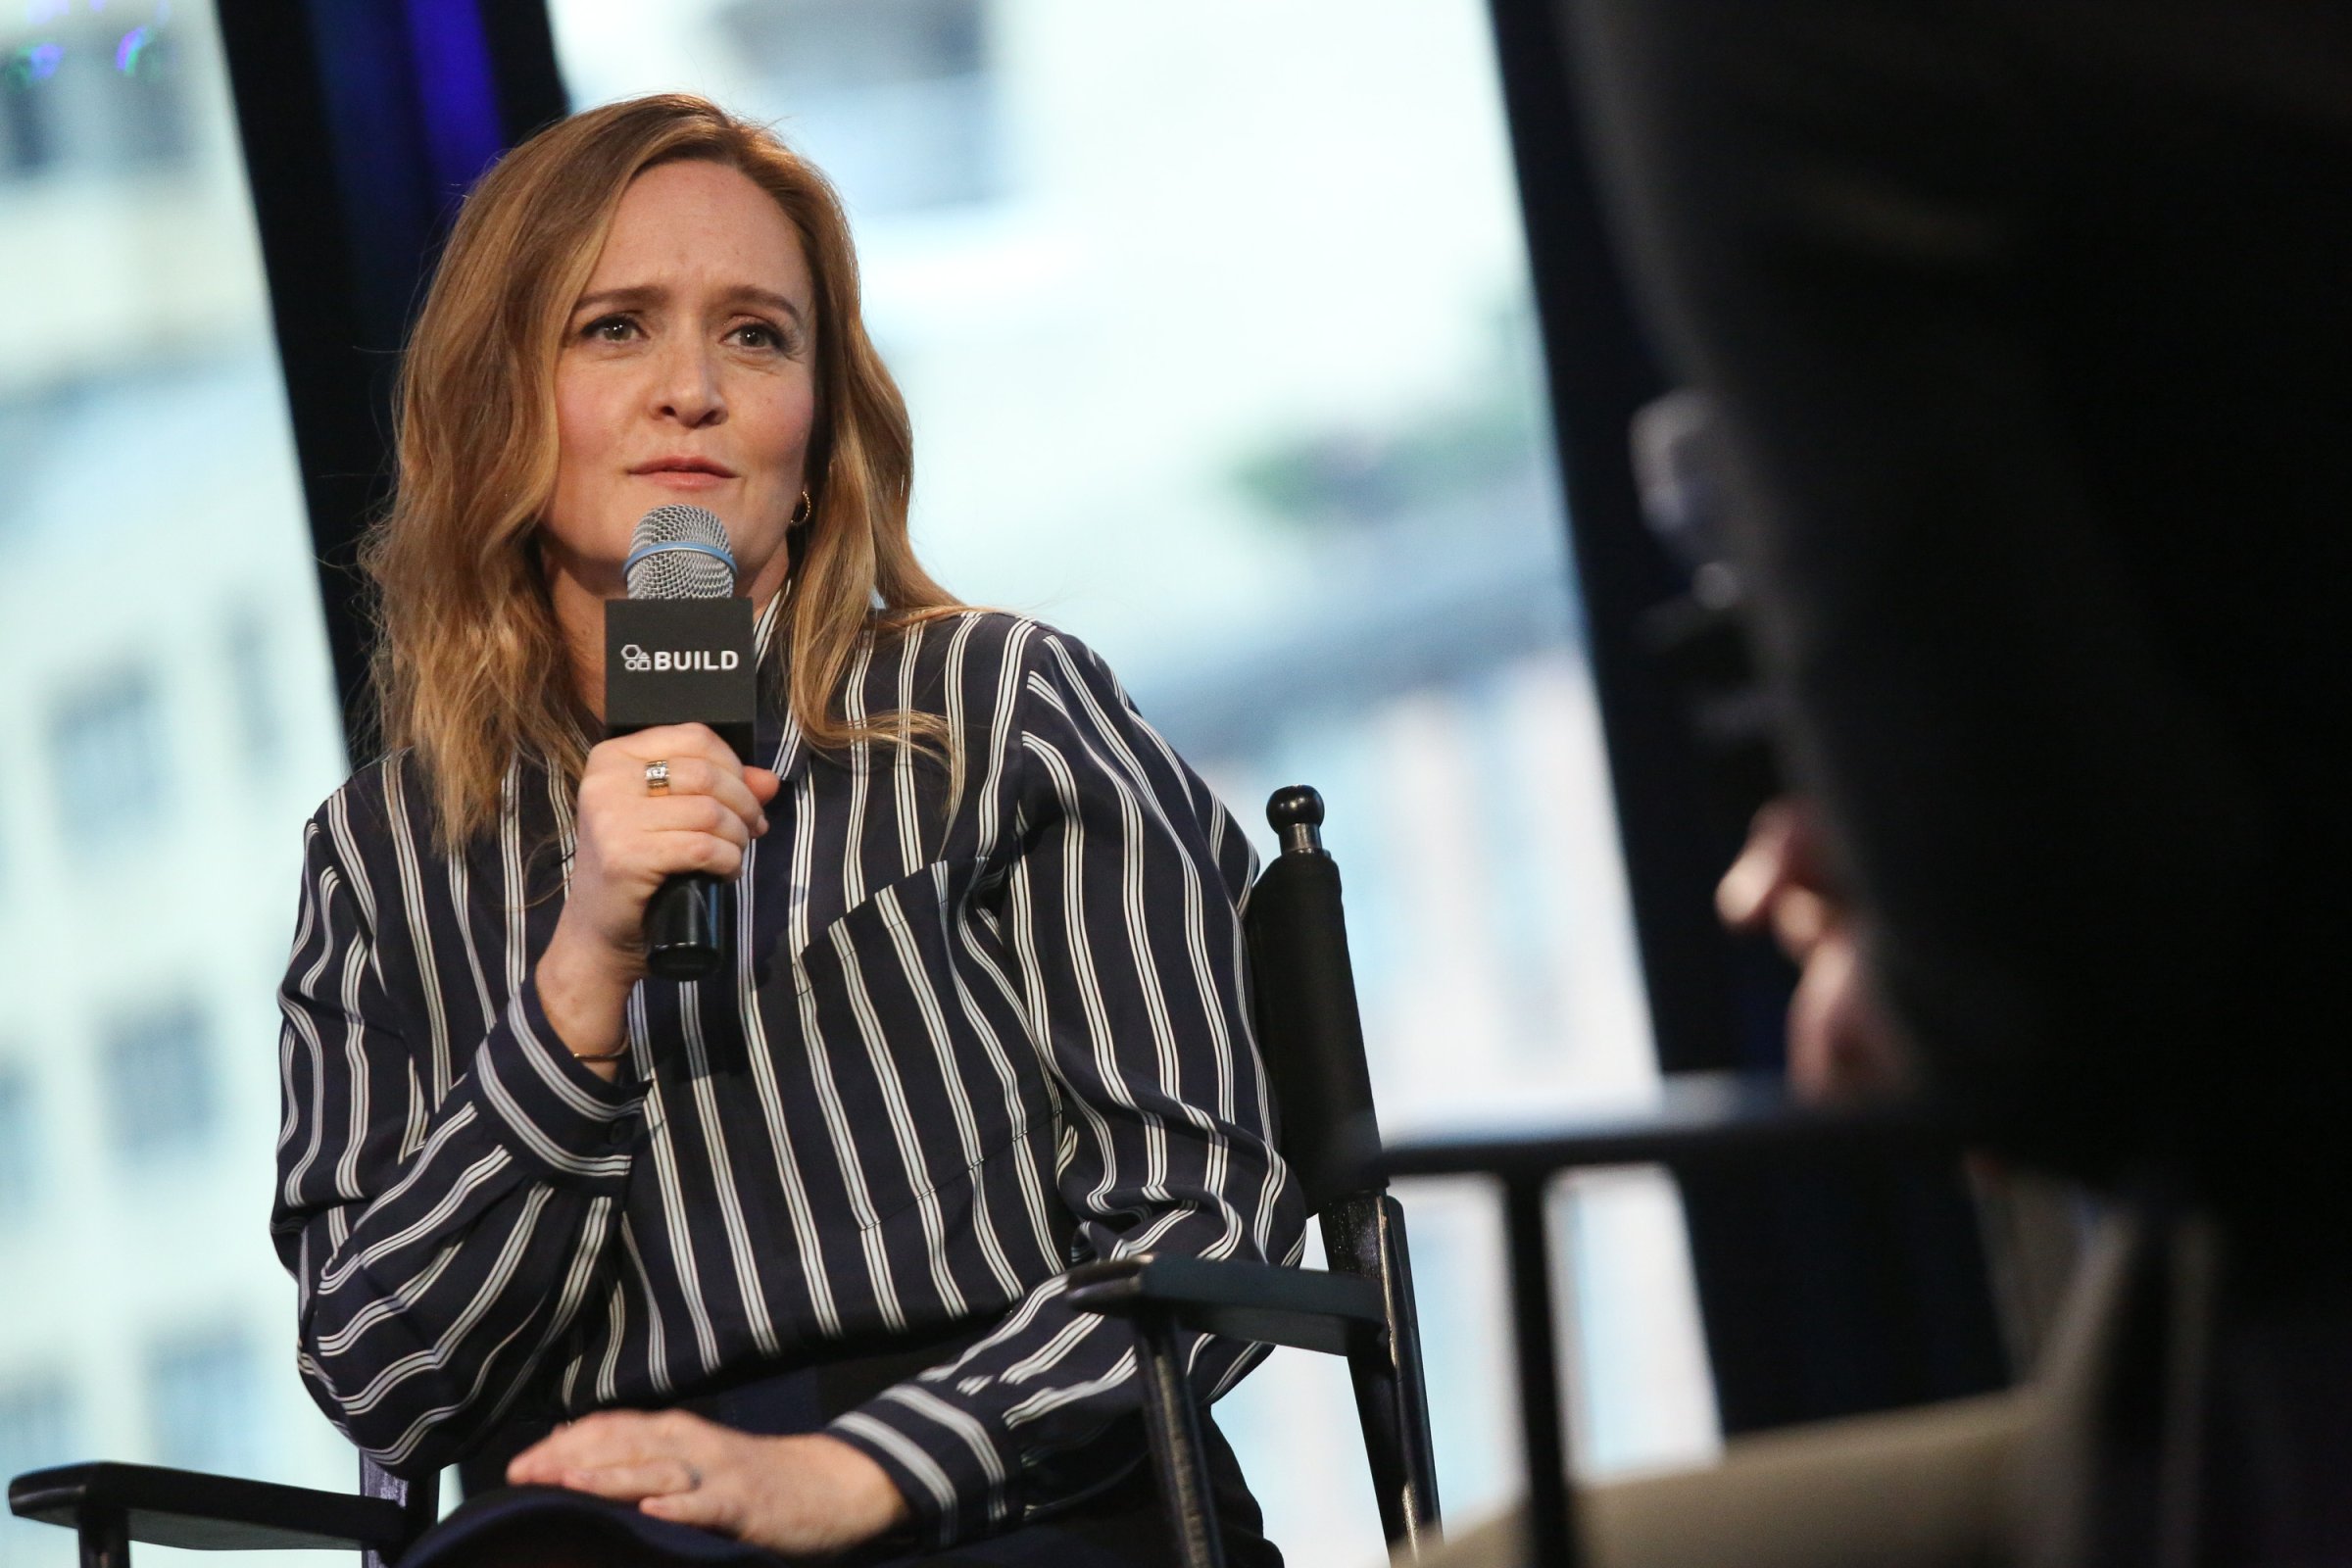 Samantha Bee attends the AOL Build Speaker Series to discuss "Full Frontal with Samantha Bee" at AOL Studios In New York on April 6, 2016 in New York City.